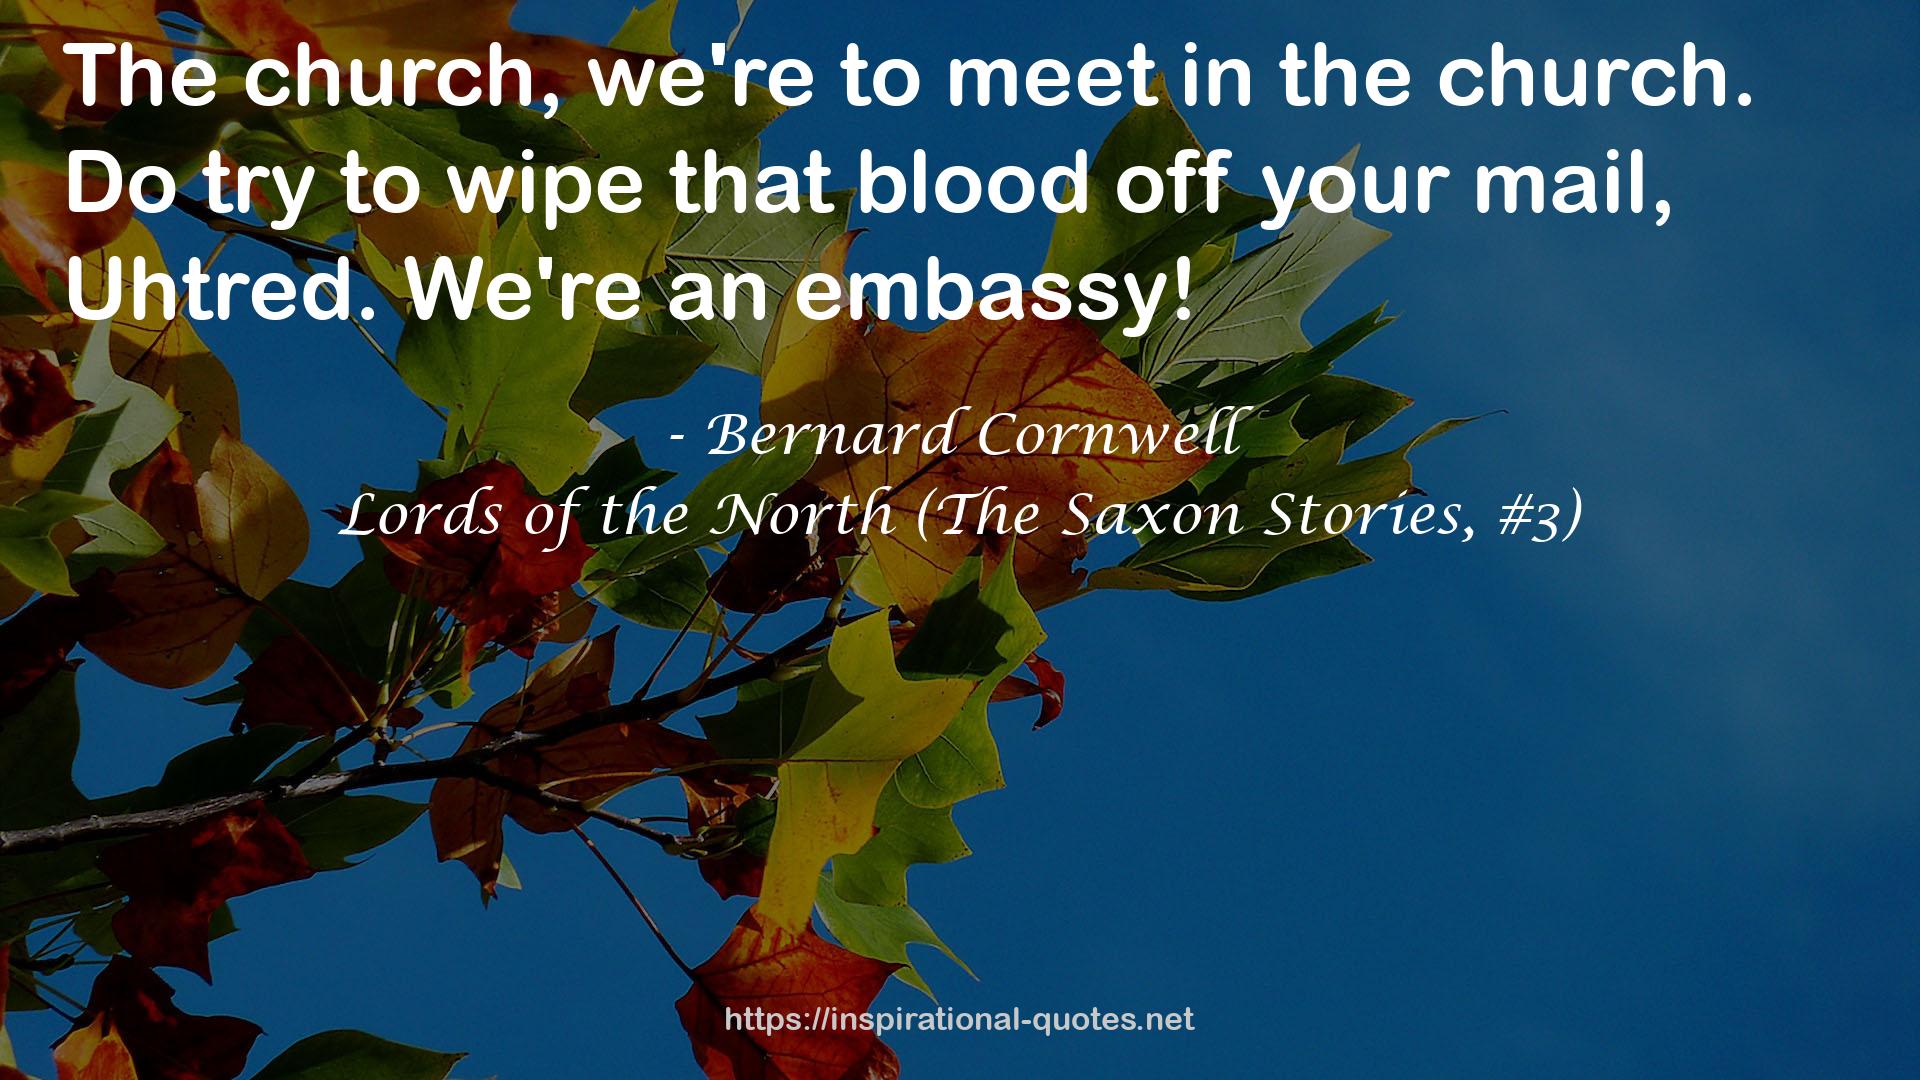 Lords of the North (The Saxon Stories, #3) QUOTES